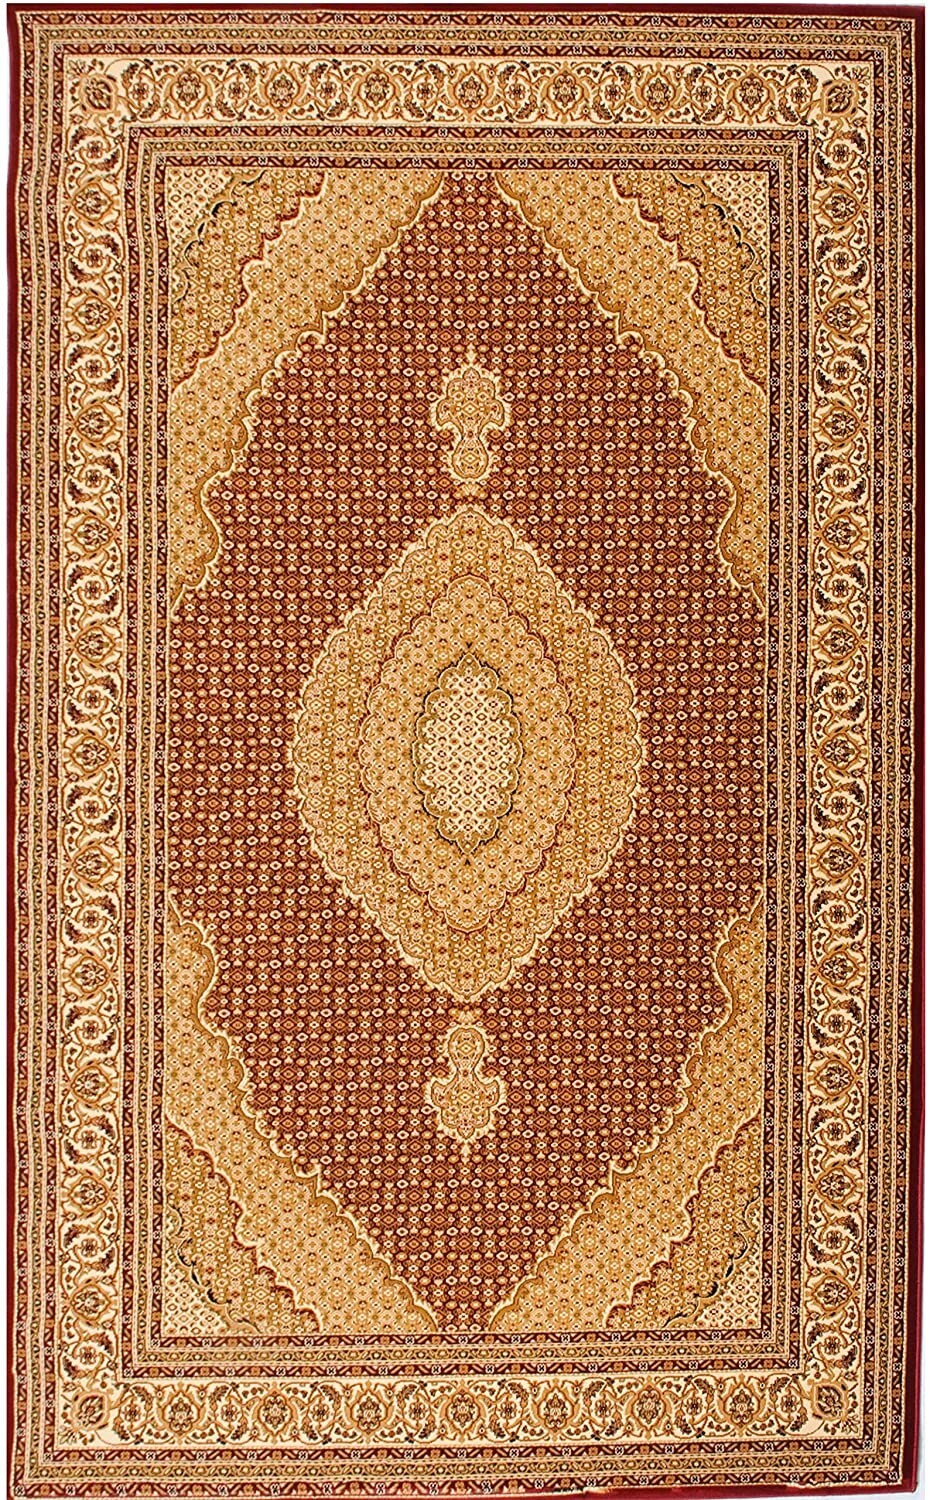 4' x 6' Red and Beige Medallion Area Rug